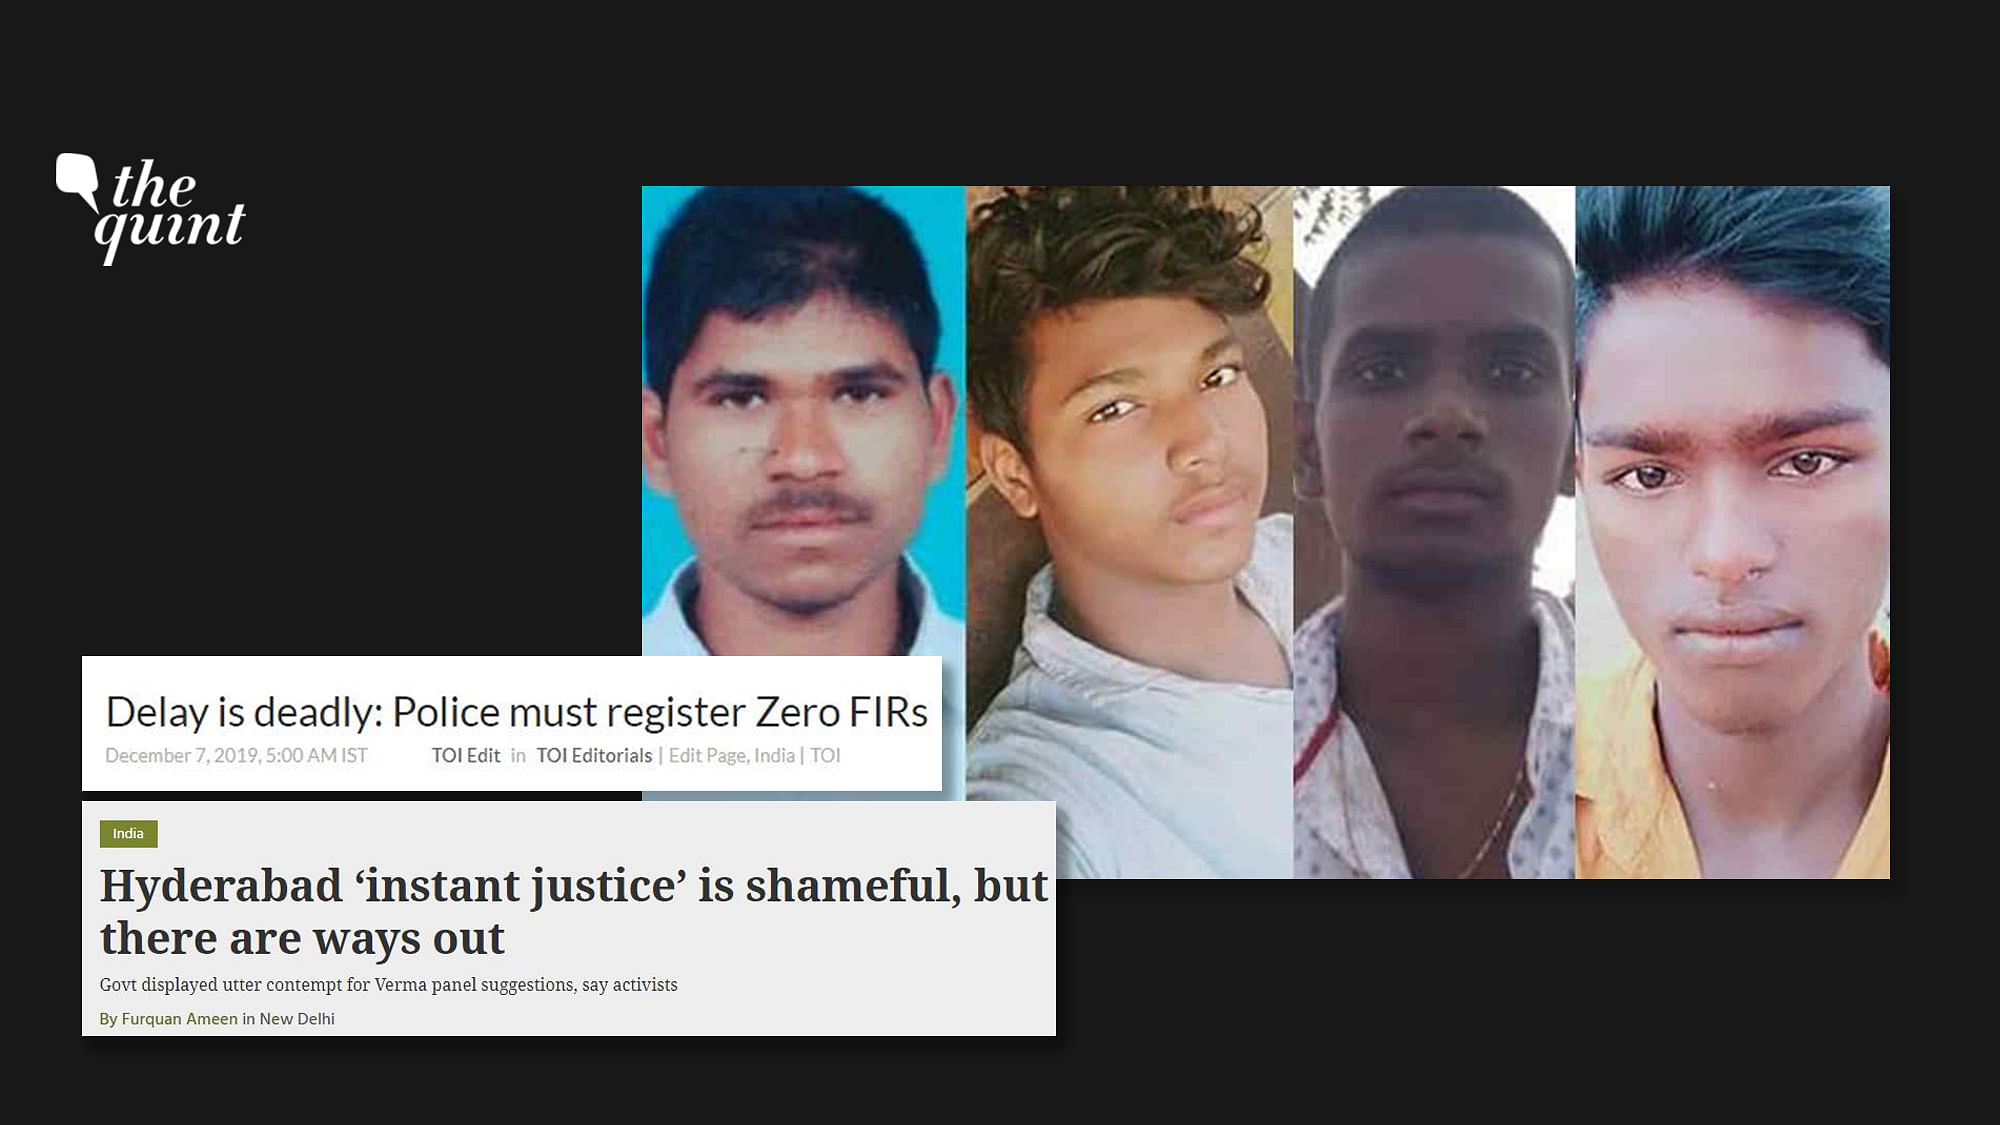 Several op-eds of major publications called out the “instance justice” meted out in the recent Hyderabad encounter deaths of the four rape and murder accused.